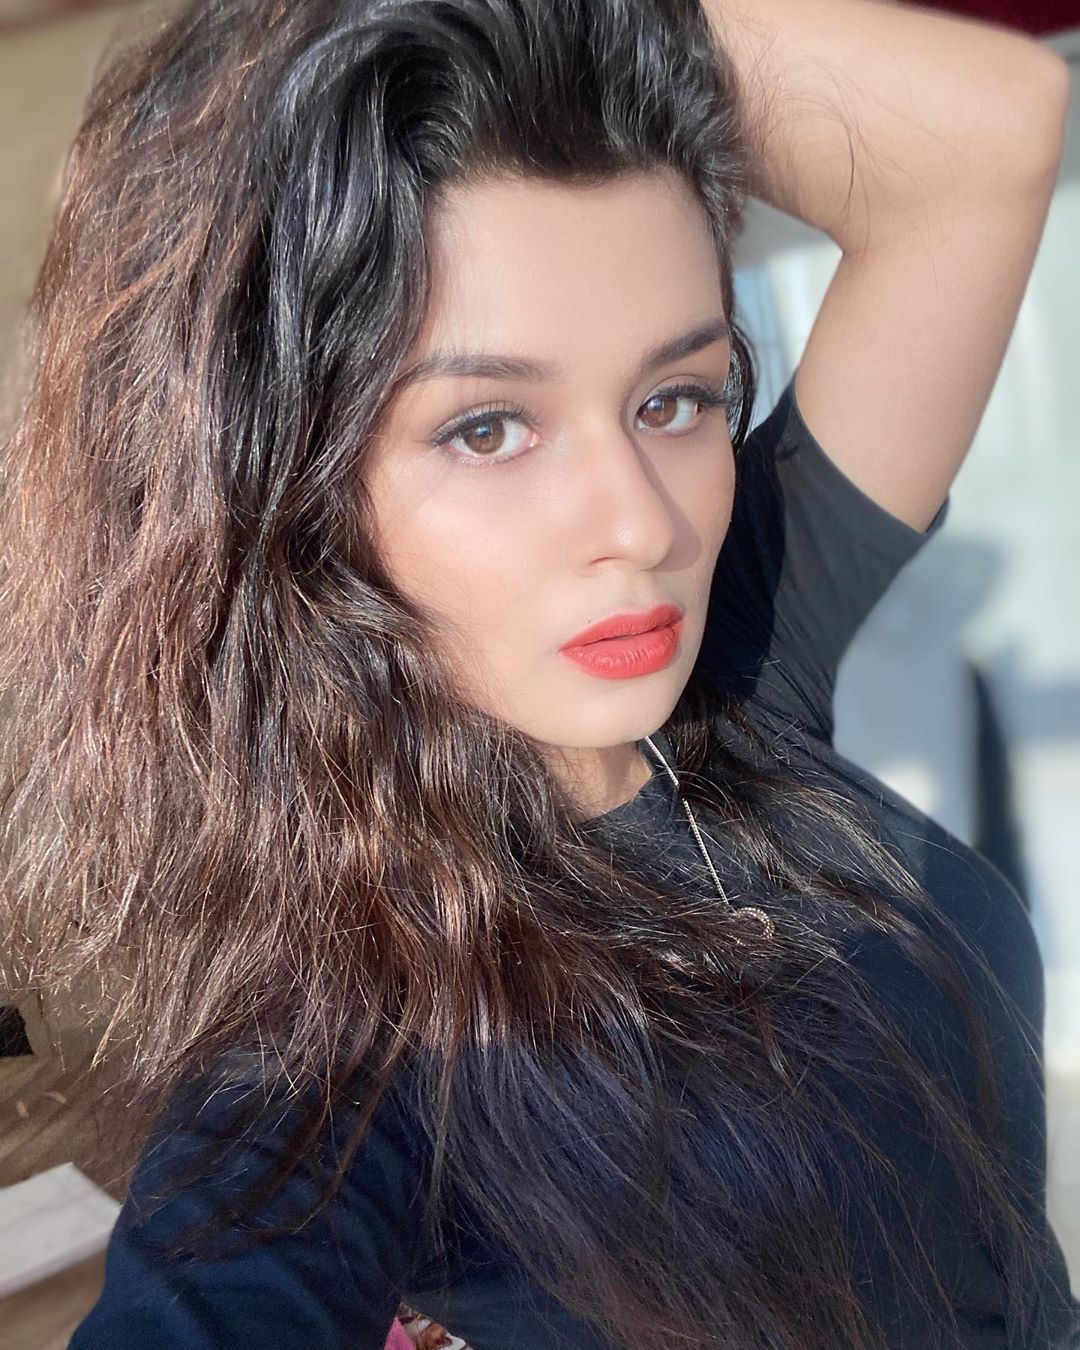 Avneet Kaur Wallpapers, Photos, Images & Pictures Pic 1- the perfect selfie 
Pic 2, 3, 4- the real struggle behind it